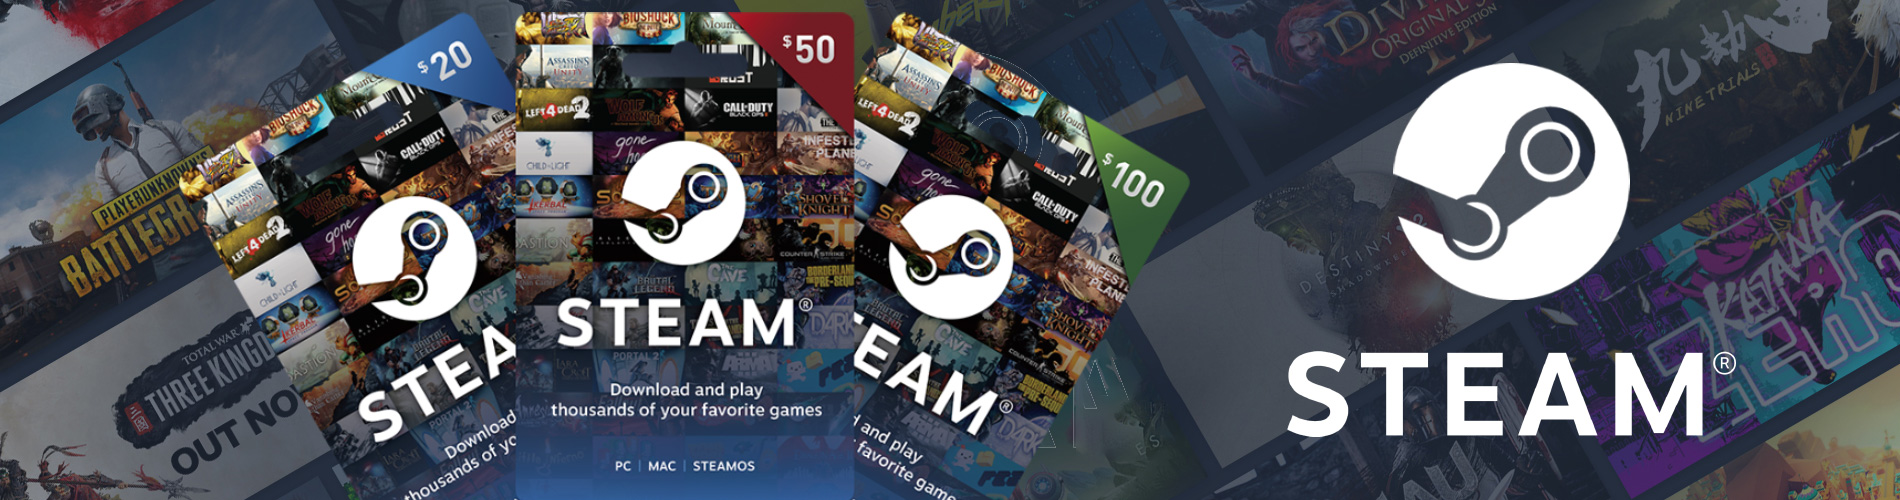 Steam Gift Cards With Instant Code Delivery Uae Ksa Bahrain